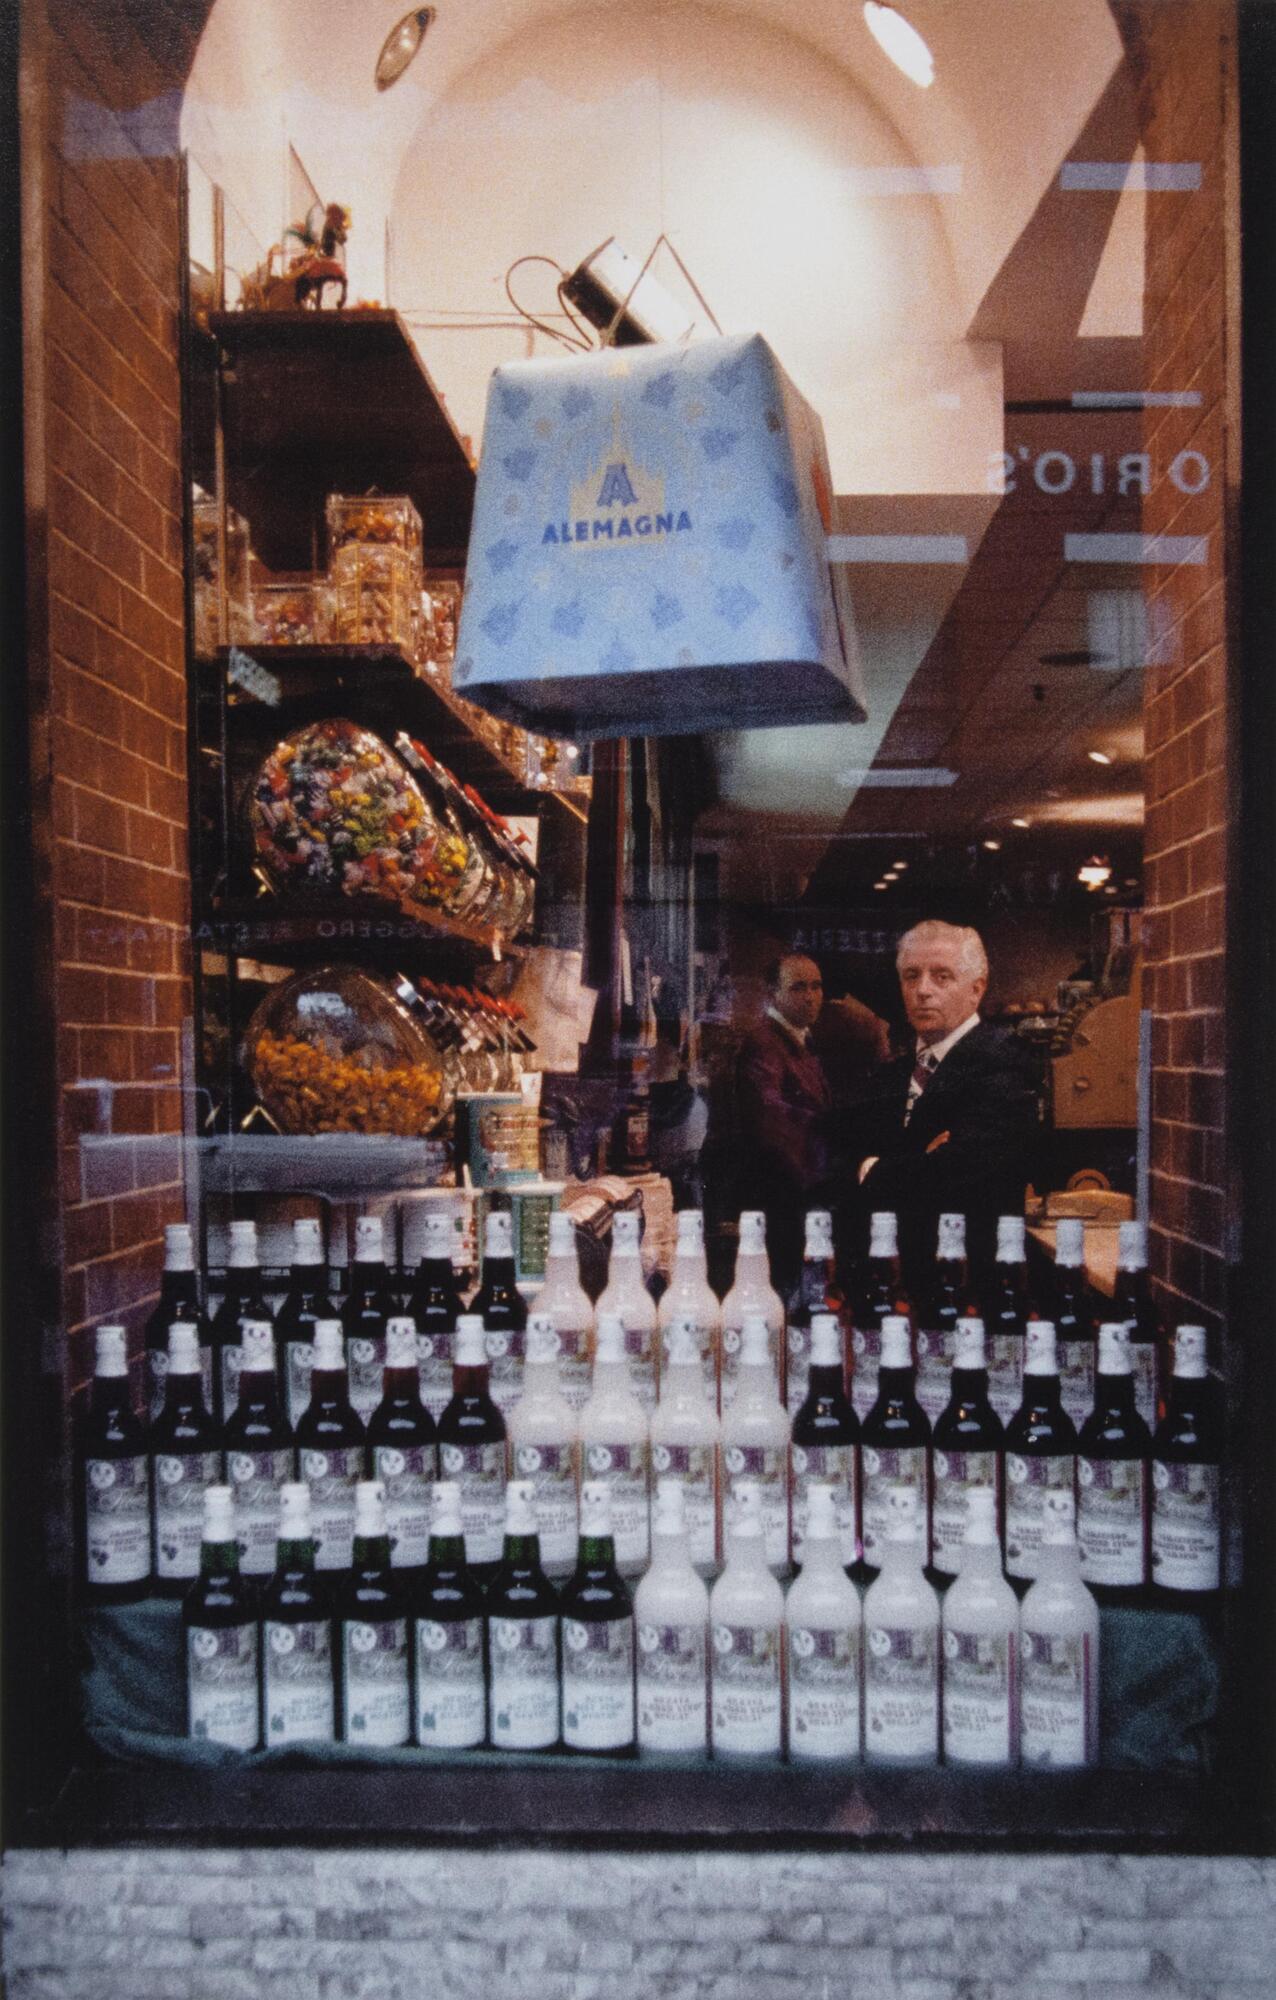 Two men inside a store looking out the window with three rows of bottles in front. "Alemagna" sign is on top of the window.